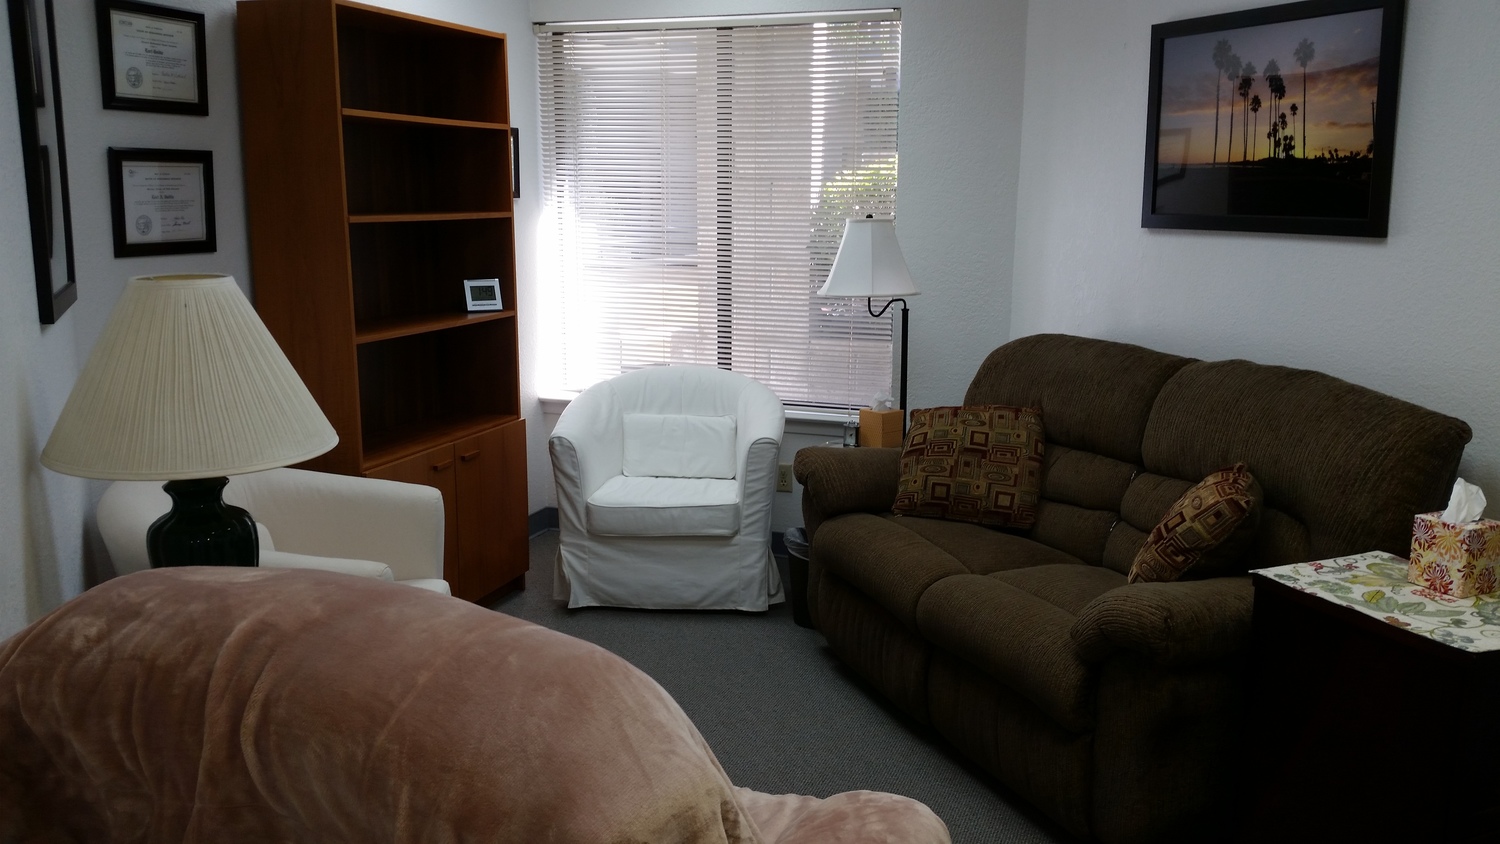 Gallery Photo of The couch is also a rocker and recliner.  Nice for doing relaxation exercises.